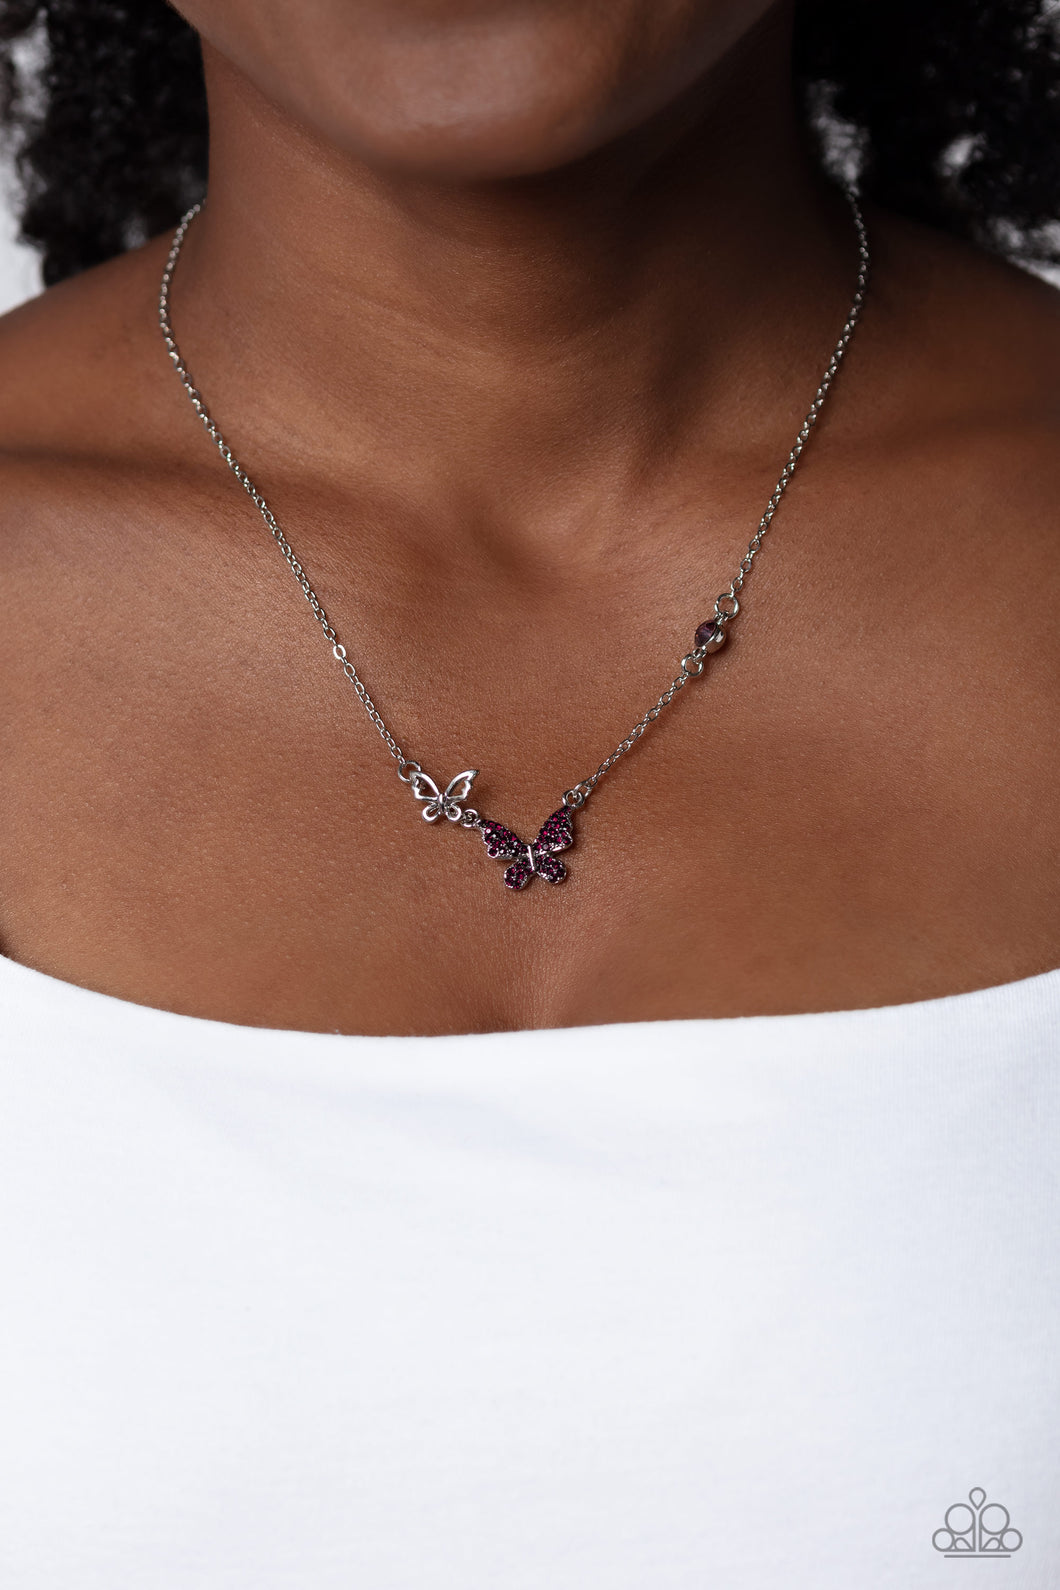 Paparazzi “Cant BUTTERFLY Me Love” Purple Butterfly Necklace - Cindysblingboutique